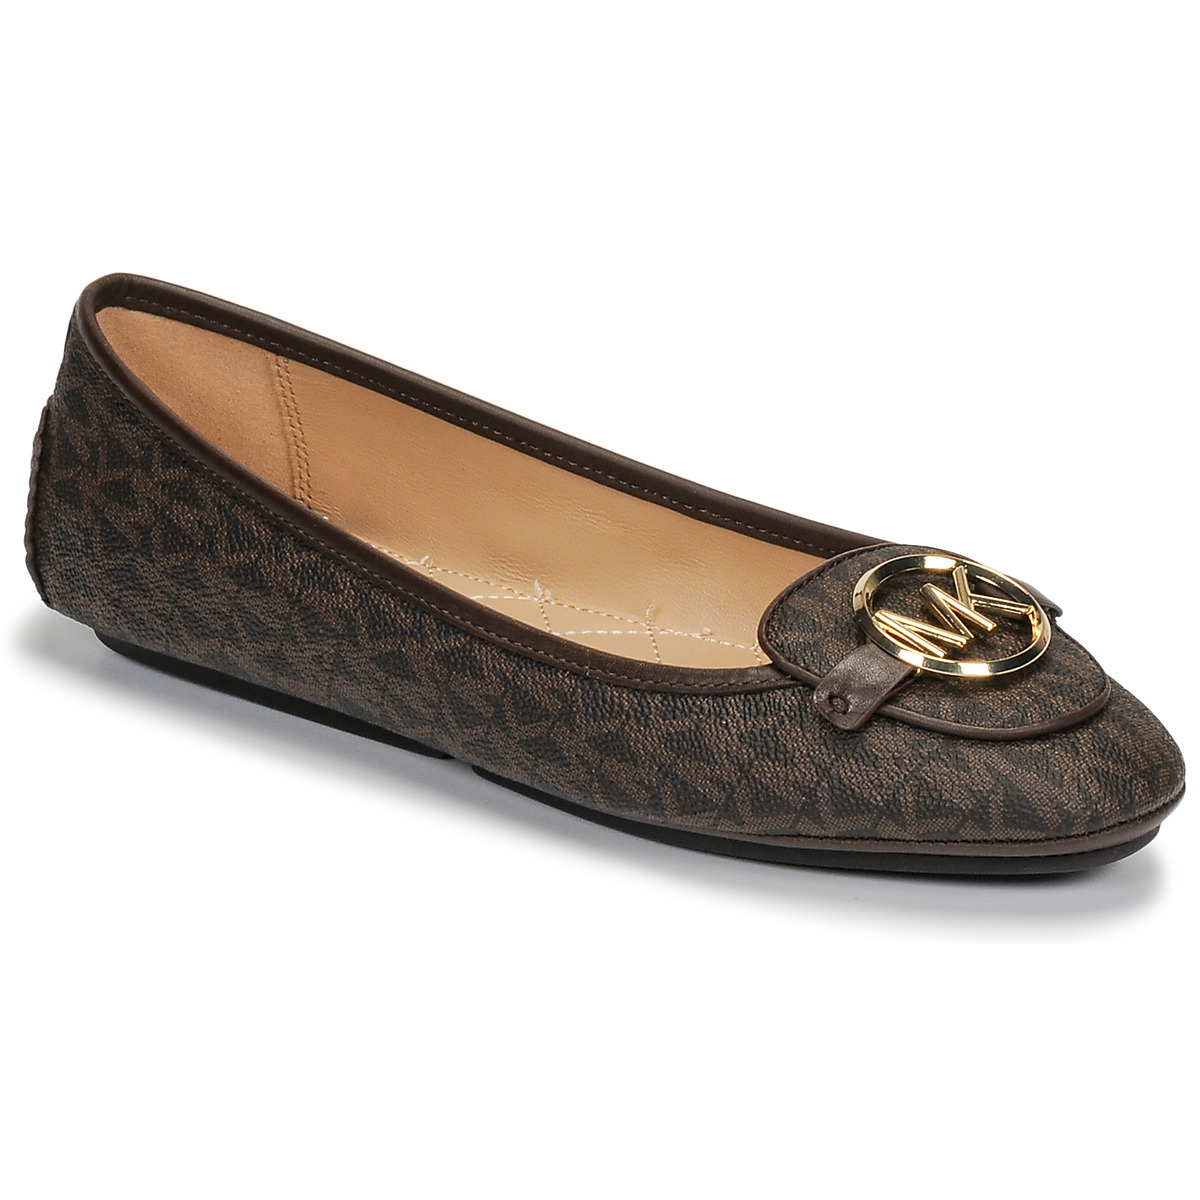 MICHAEL Michael Kors LILLIE MOC Brown  Free delivery  Spartoo UK   Shoes  Ballerinas Women  10480